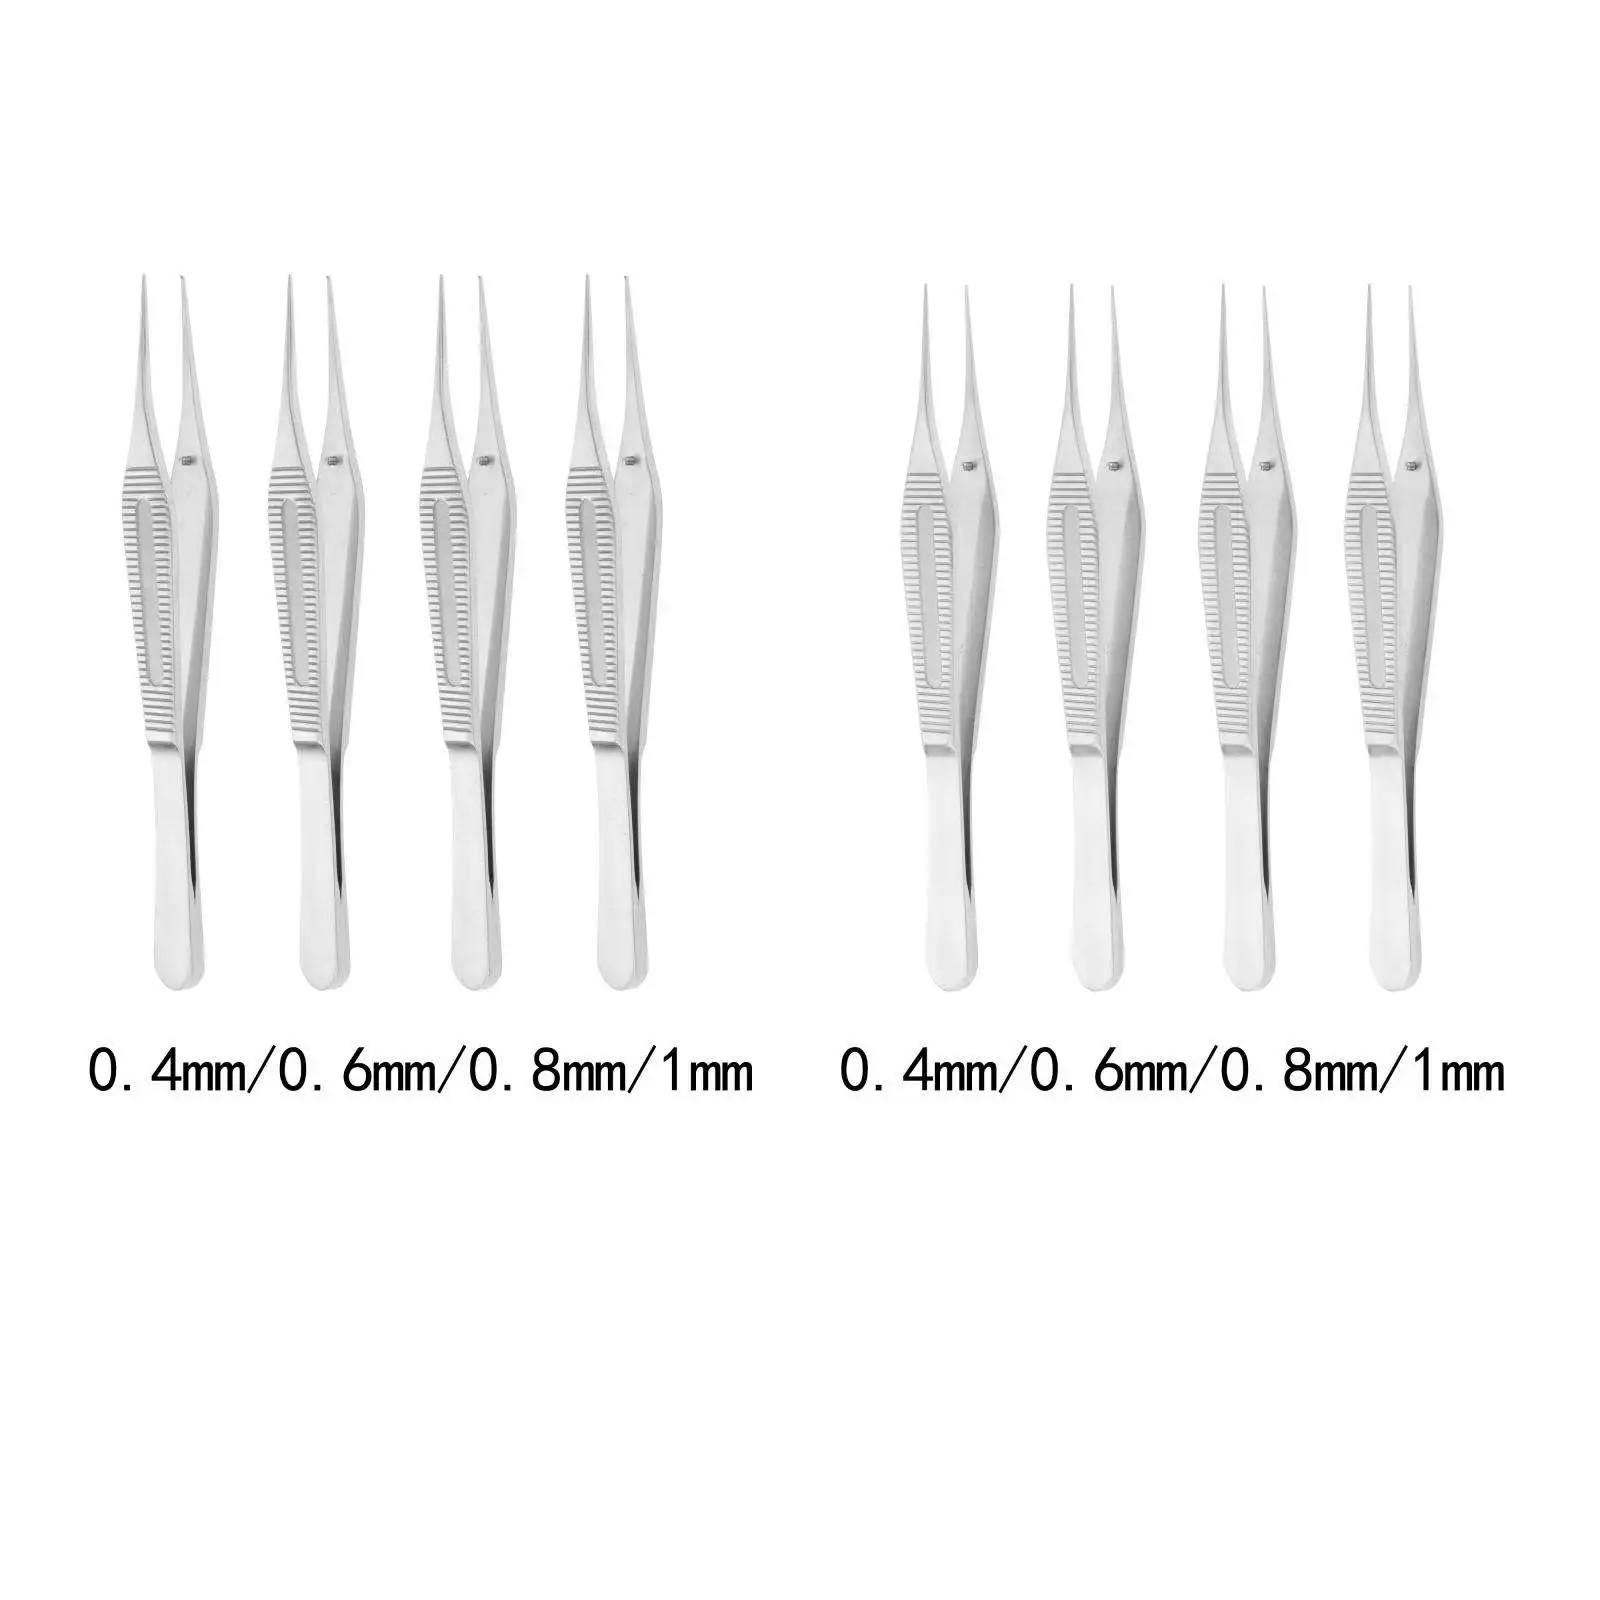 Long Fat Tweezers Compact Pointed Stainless Steel Makeup Tool Micro Forceps for Microscopes Jewelry DIY Craft Beading Hotel